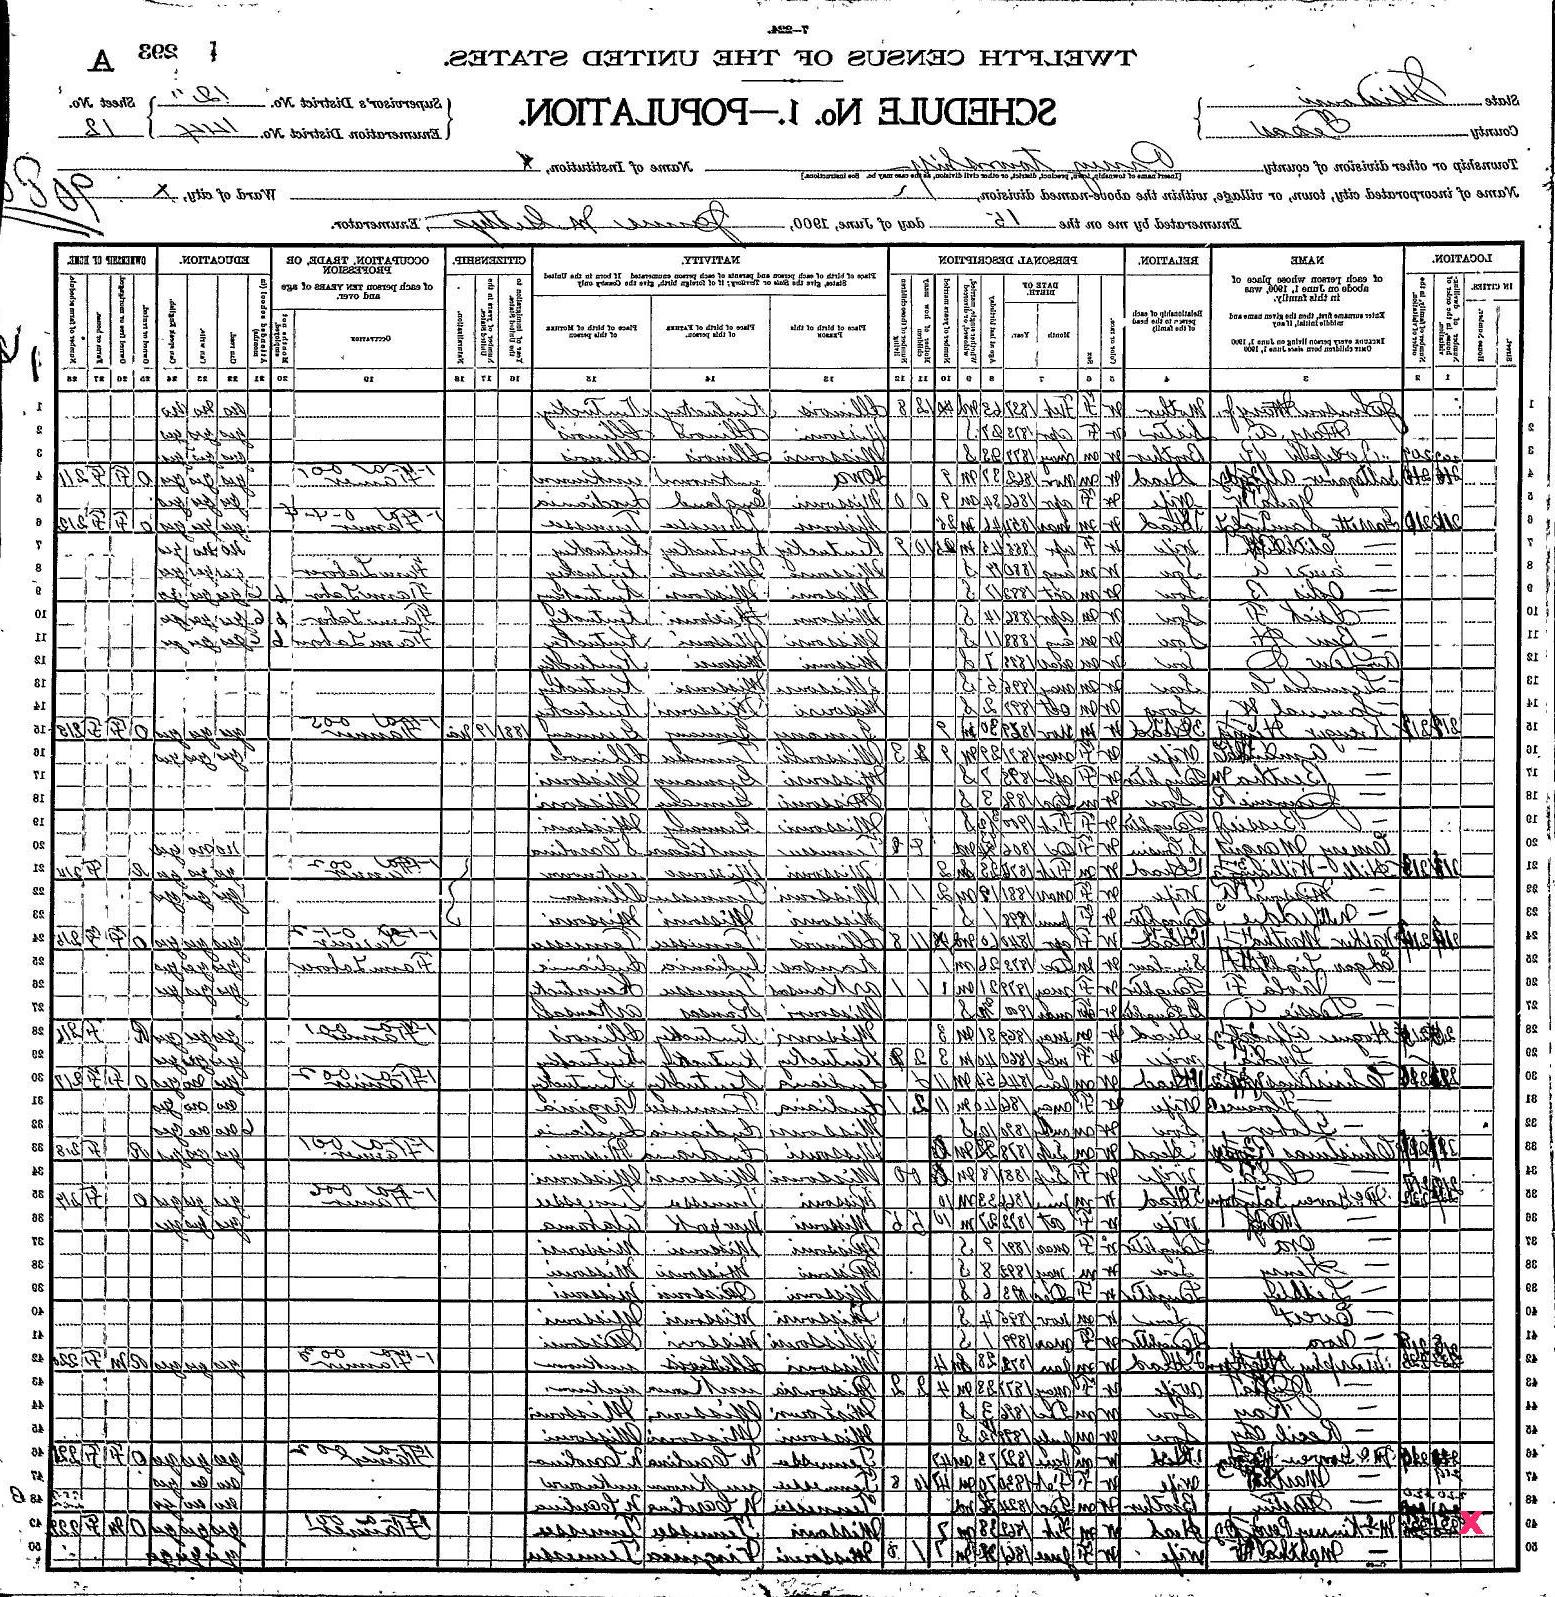 Notes for PERRY MCKINNEY: 1900 Census MO Texas County pg293A